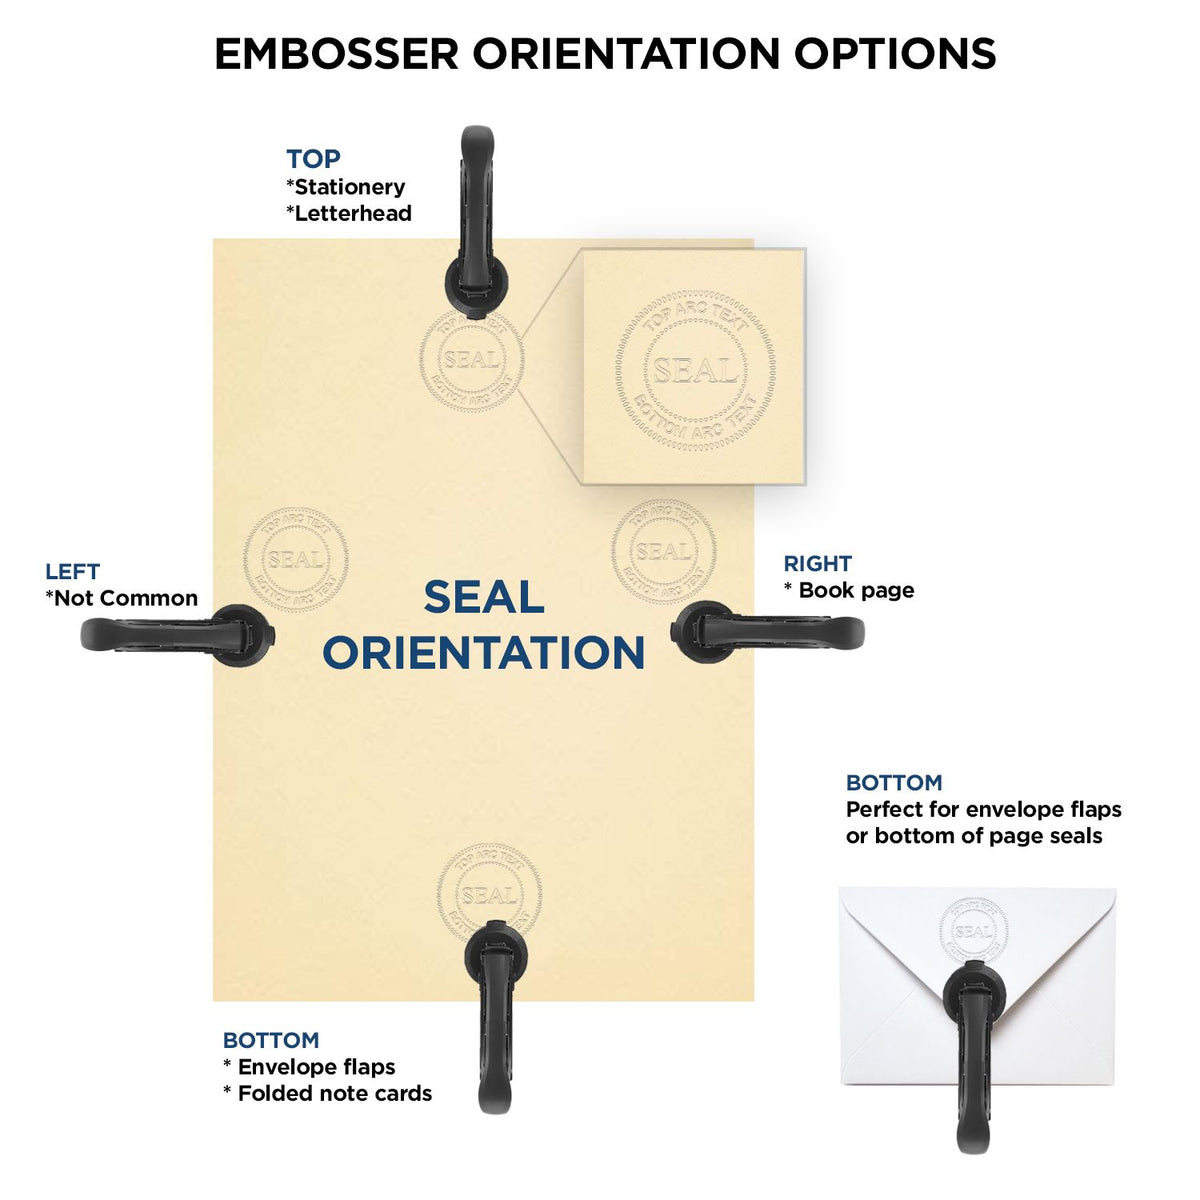 An infographic for the Handheld South Dakota Professional Geologist Embosser showing embosser orientation, this is showing examples of a top, bottom, right and left insert.